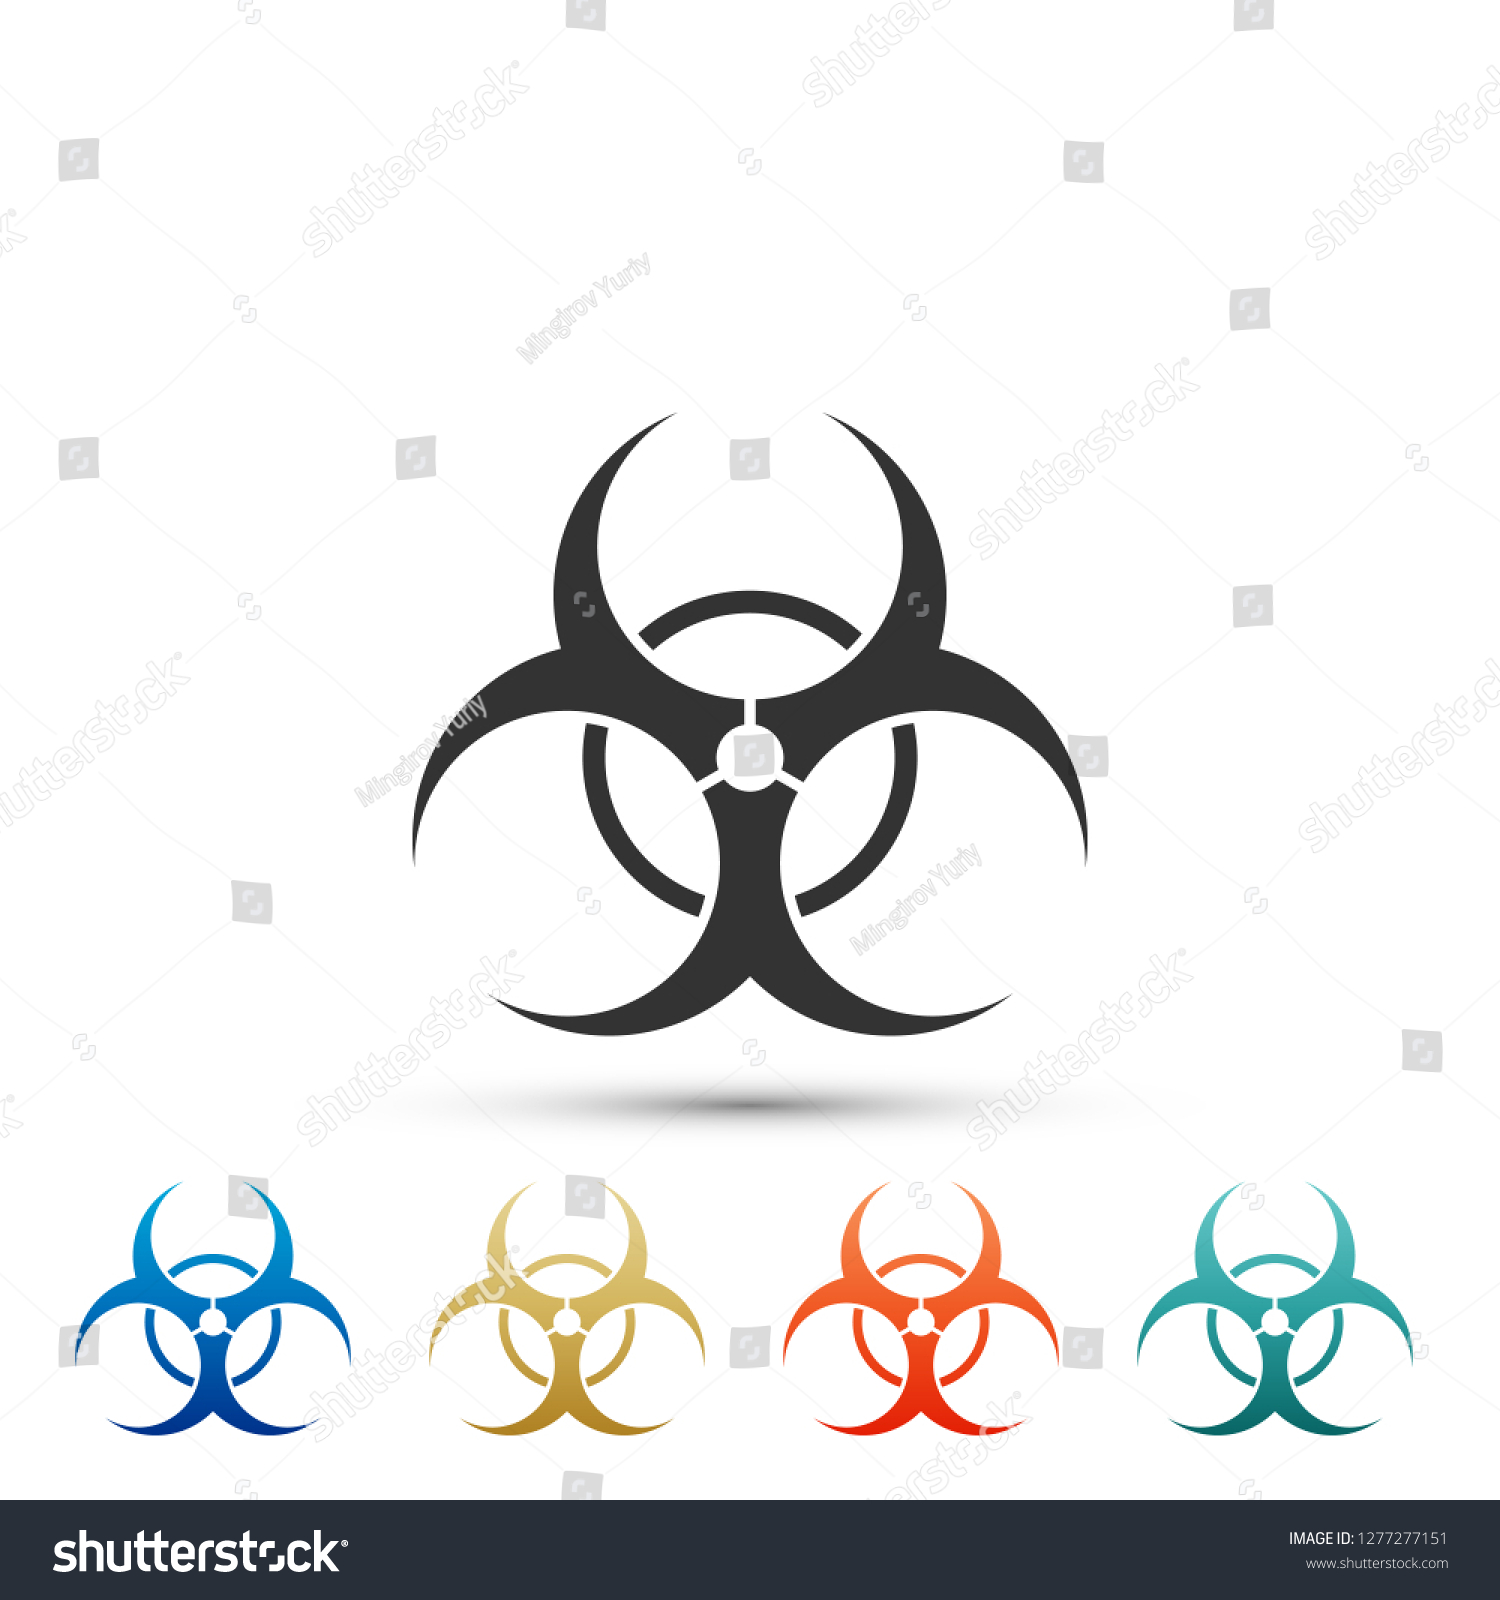 Biohazard symbol icon isolated on white background. Set elements in colored icons. Flat design #1277277151